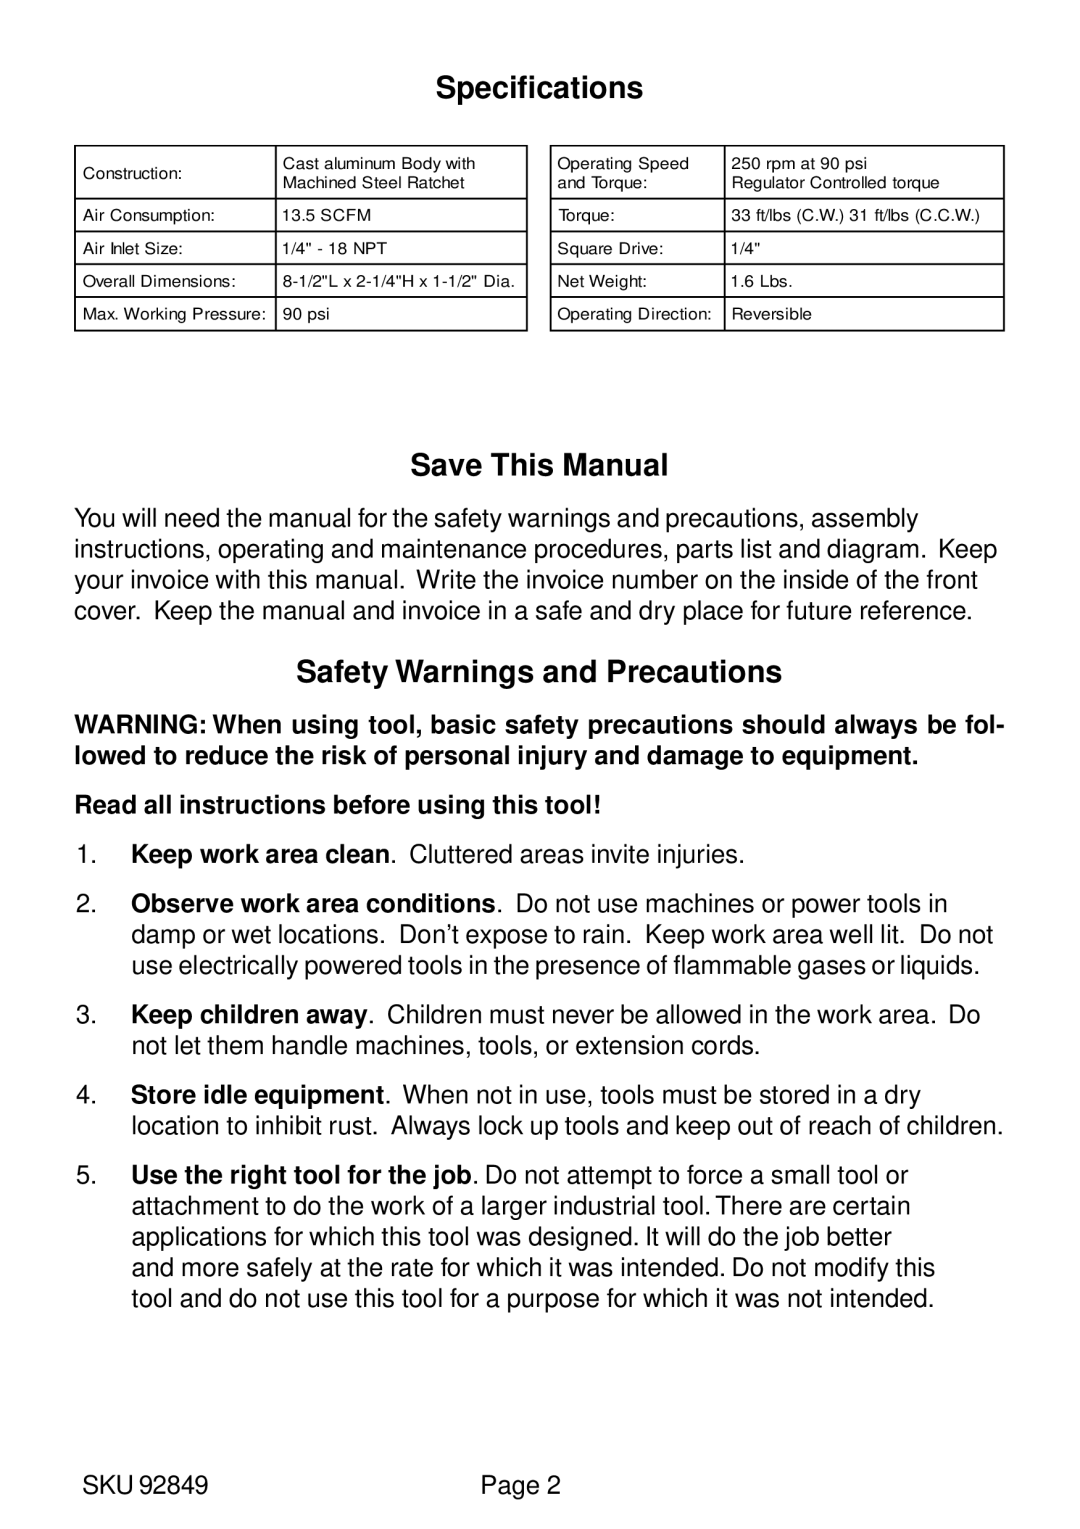 Harbor Freight Tools 92849 operating instructions Specifications, Save This Manual, Safety Warnings and Precautions 